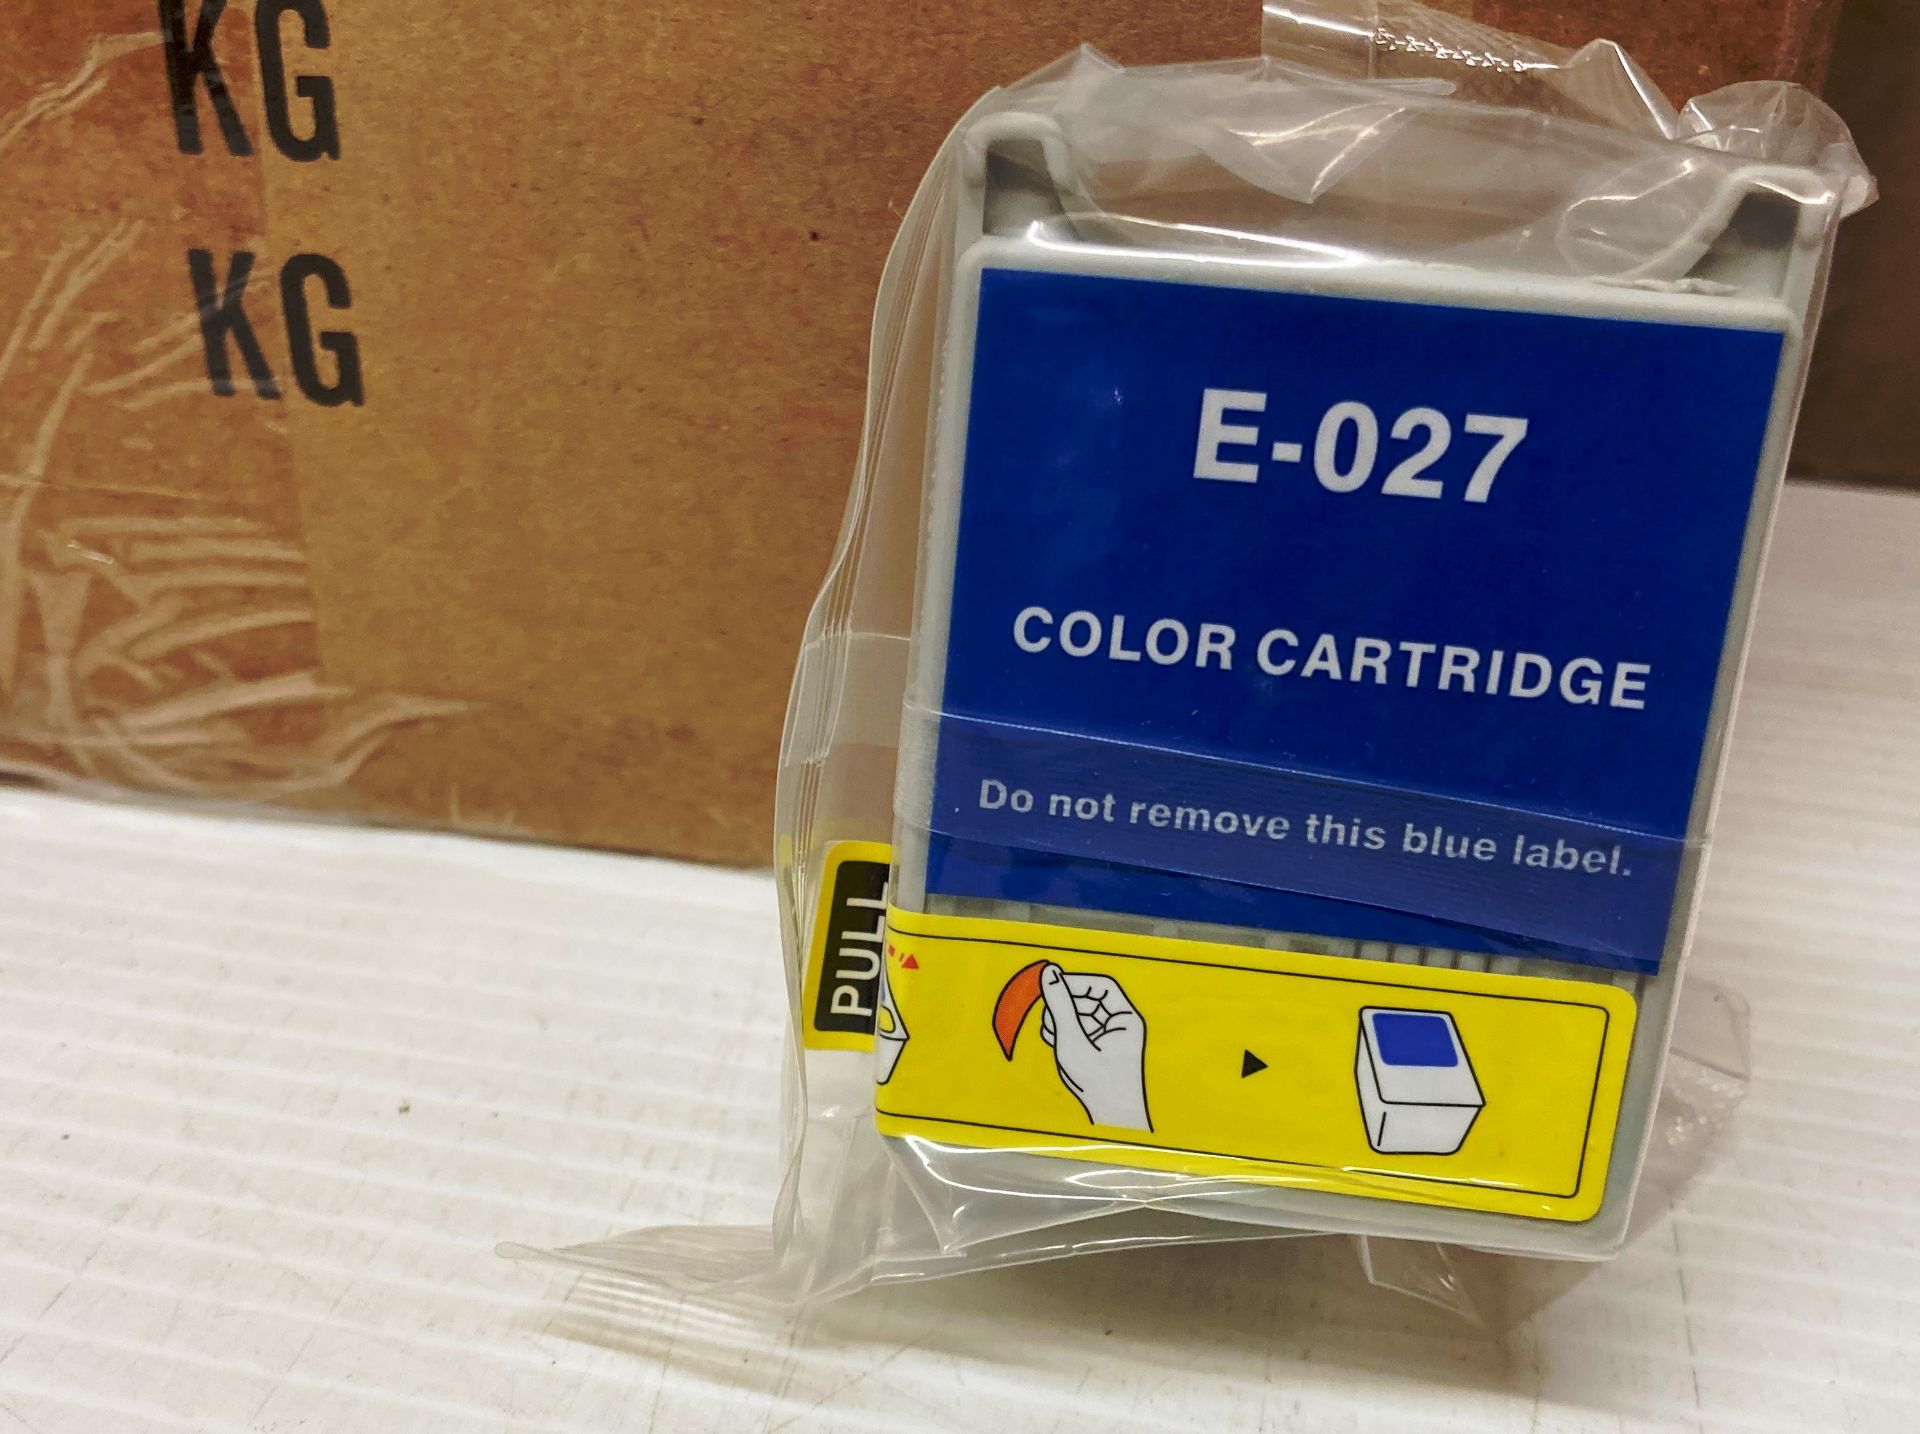 Approximately 1420 x E-027/026/028 printer cartridges (8 outer boxes) (saleroom location: K11)